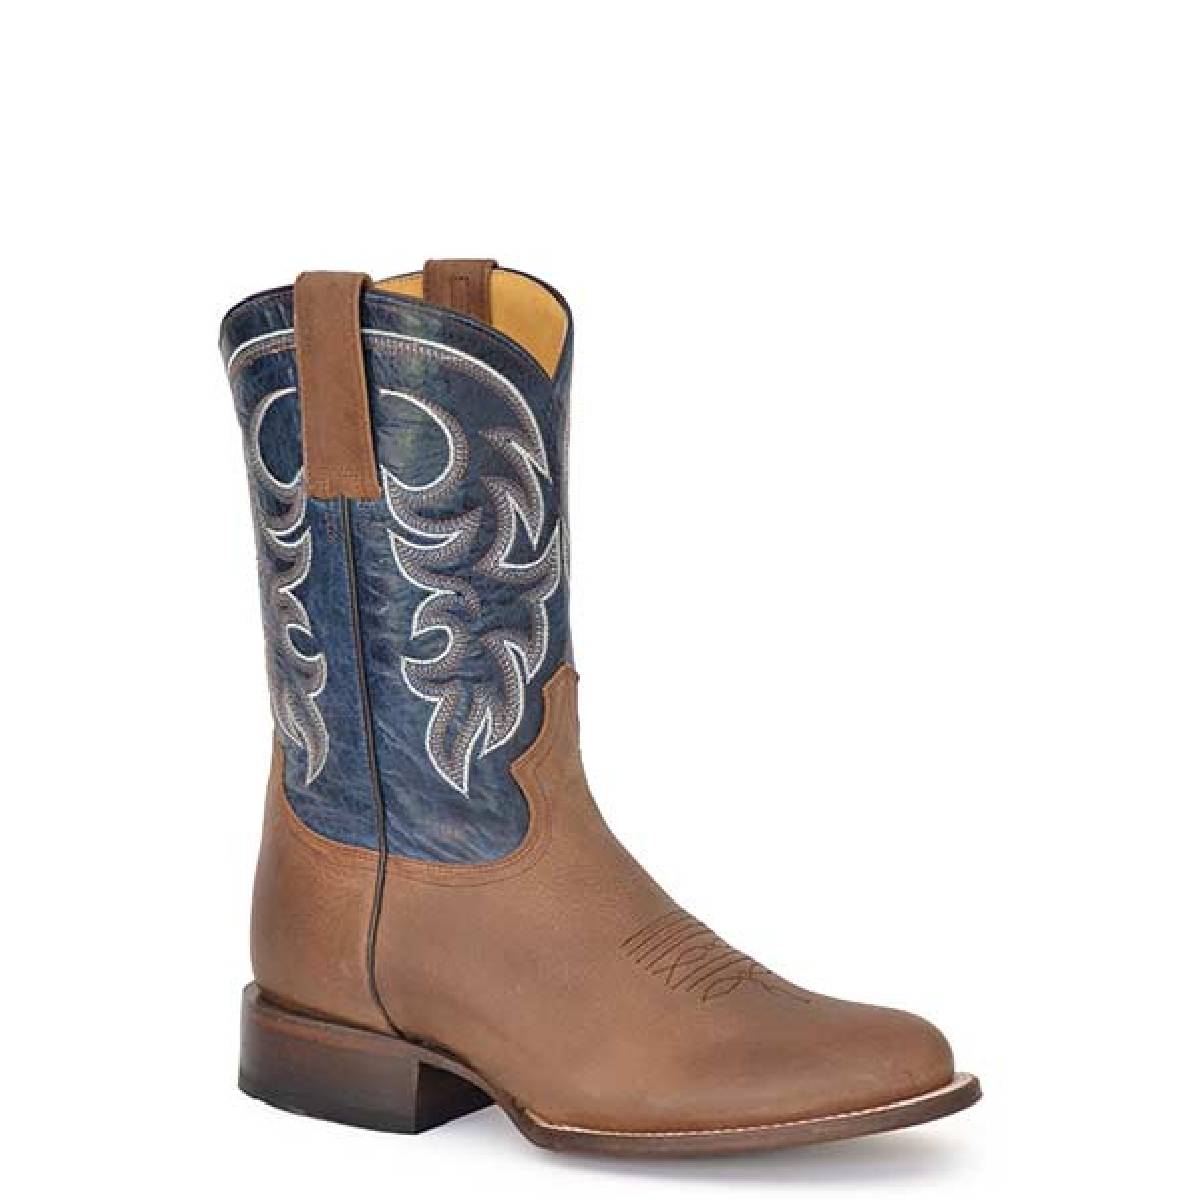 Men's Roper Rowdy Leather Boots Handcrafted Tan - yeehawcowboy